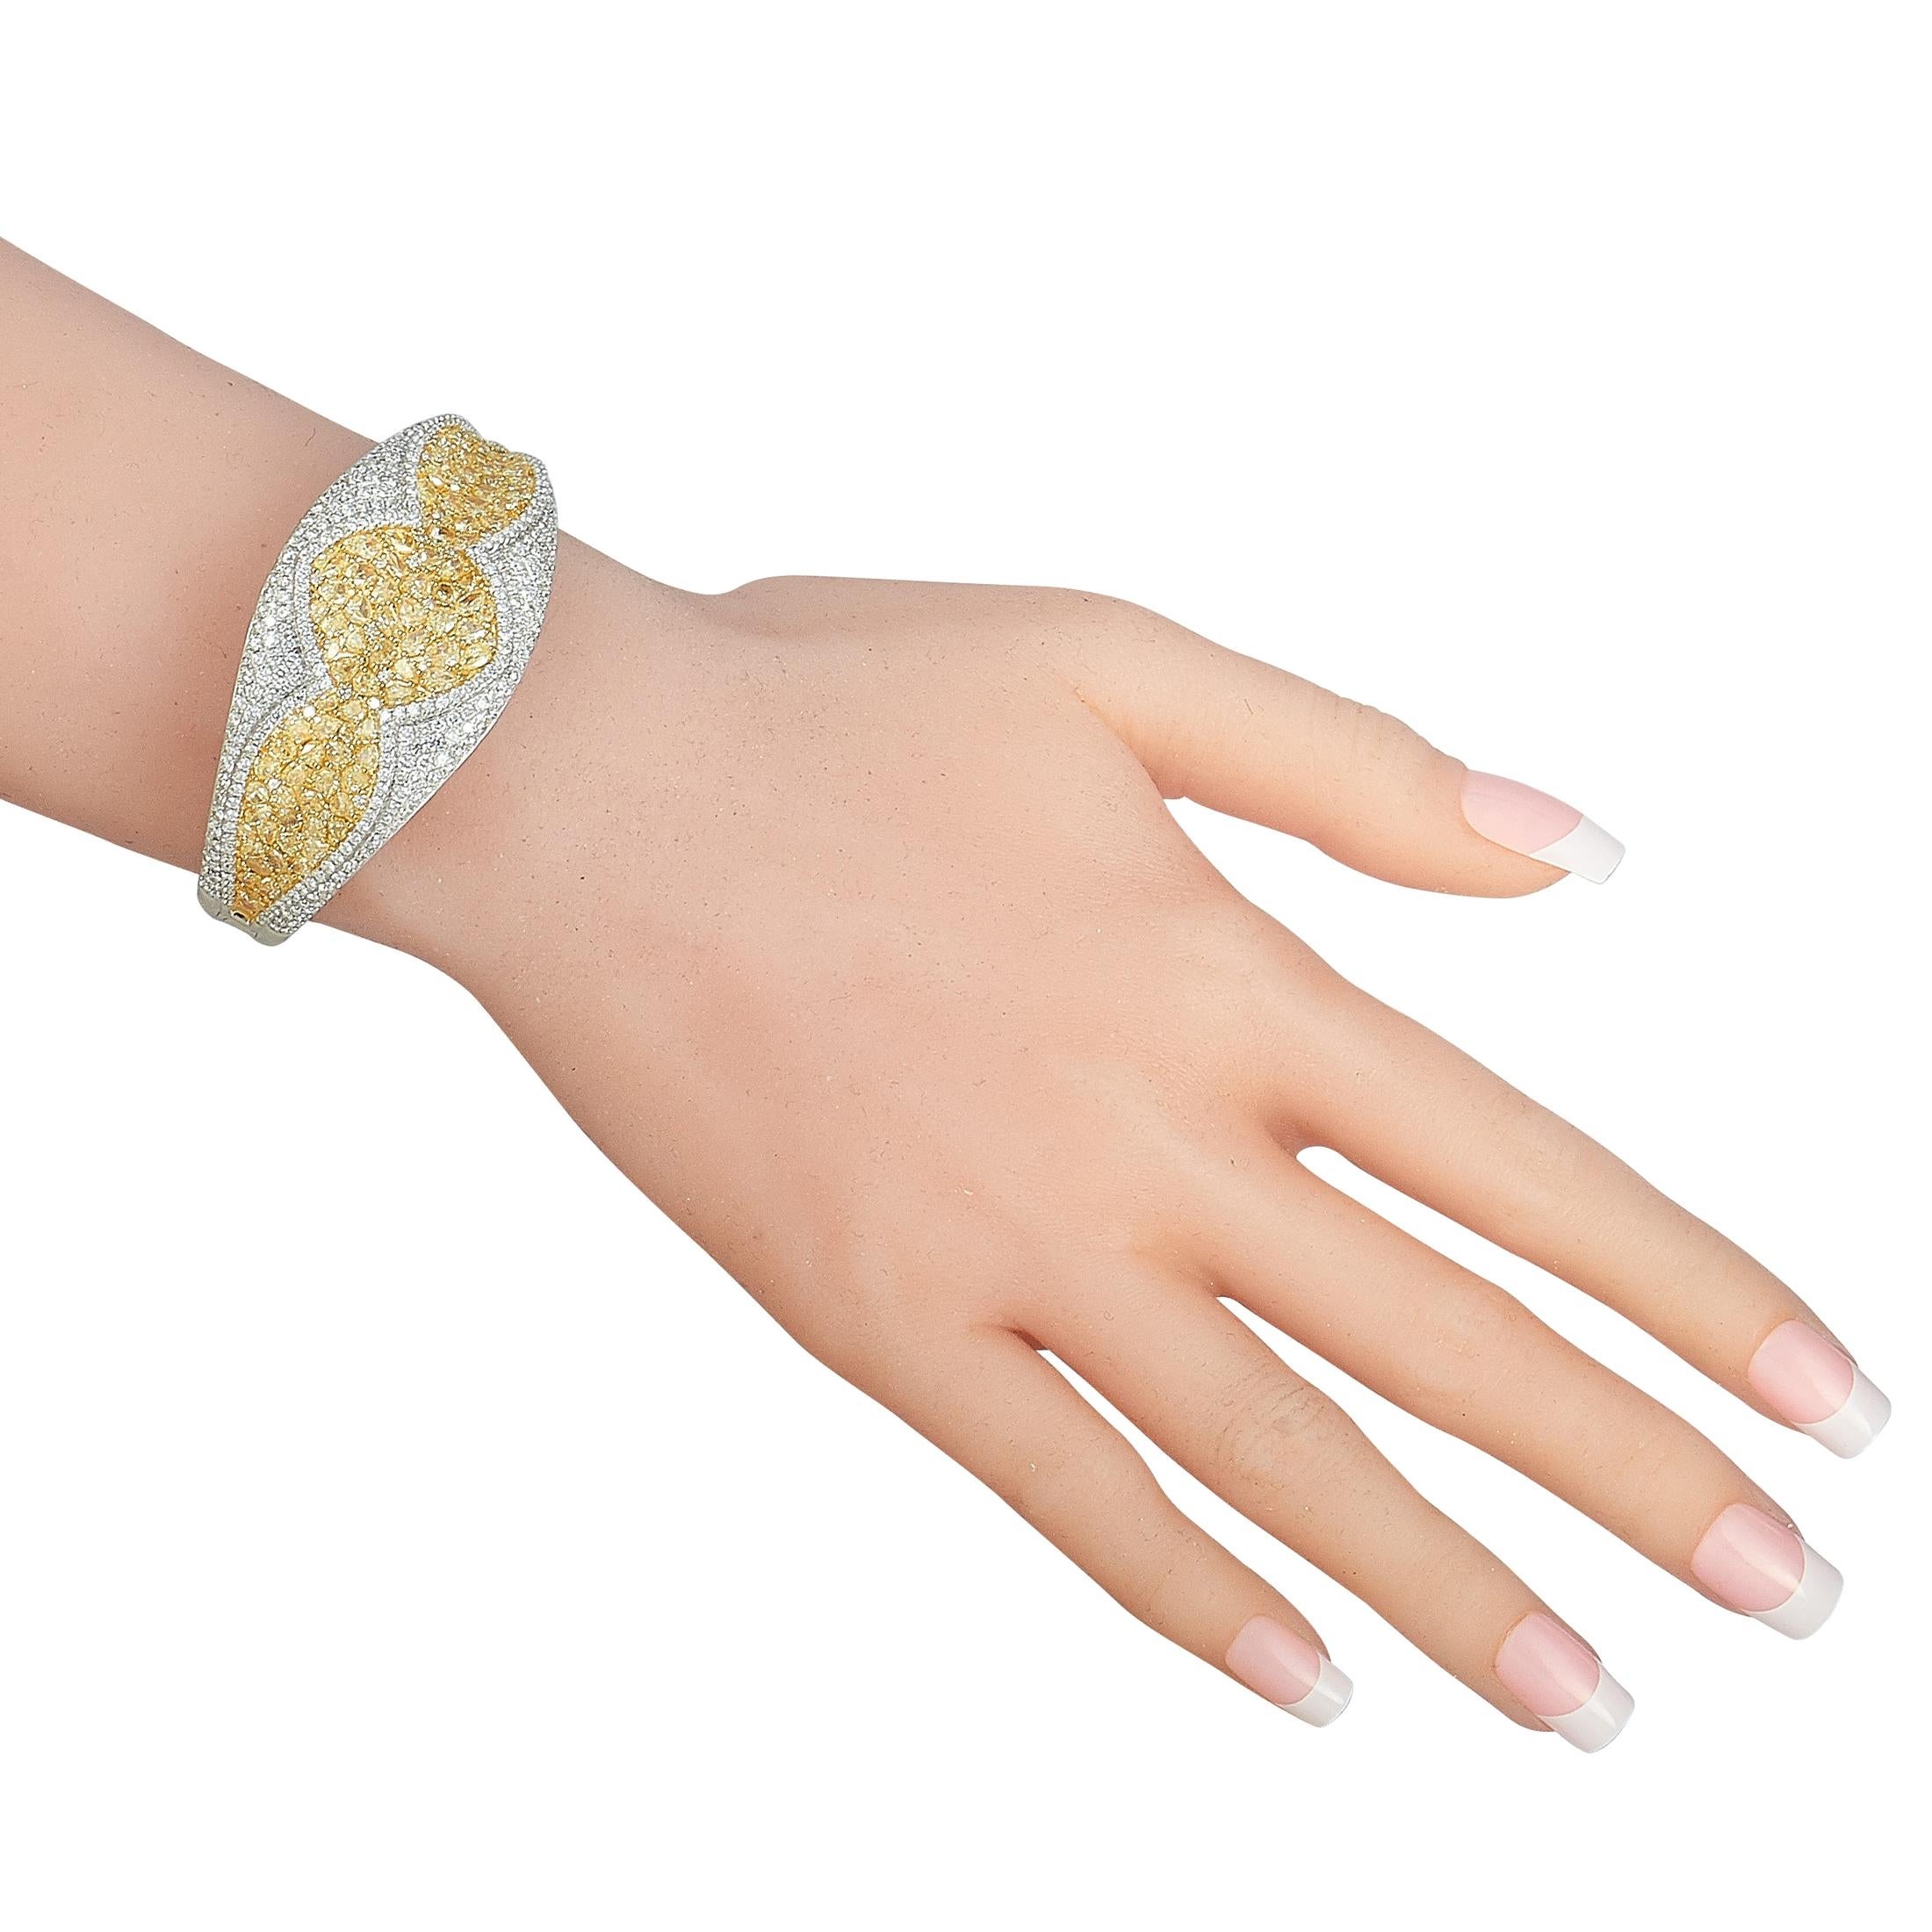 This LB Exclusive bracelet is made of 18K white gold and embellished with white and yellow diamonds that total 6.17 and 11.93 carats respectively. The bracelet weighs 53 grams and measures 7” in length.

Offered in brand new condition, this jewelry